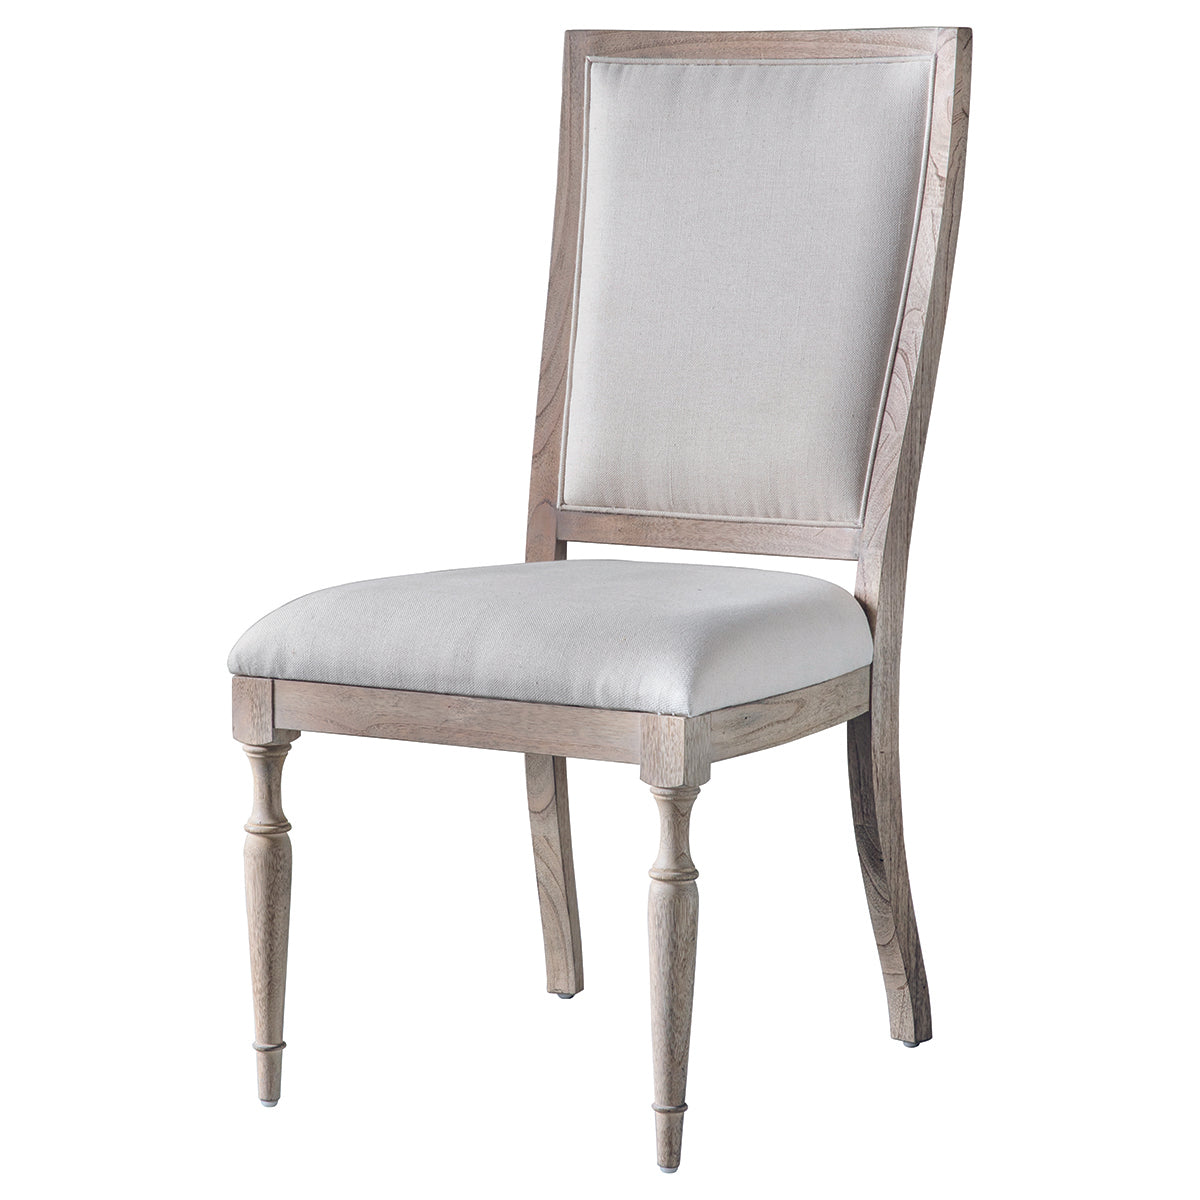 A Kikiathome.co.uk Belsford Side Chair 500x610x1010mm, perfect for interior decor or home furniture, featuring a beige upholstered seat.